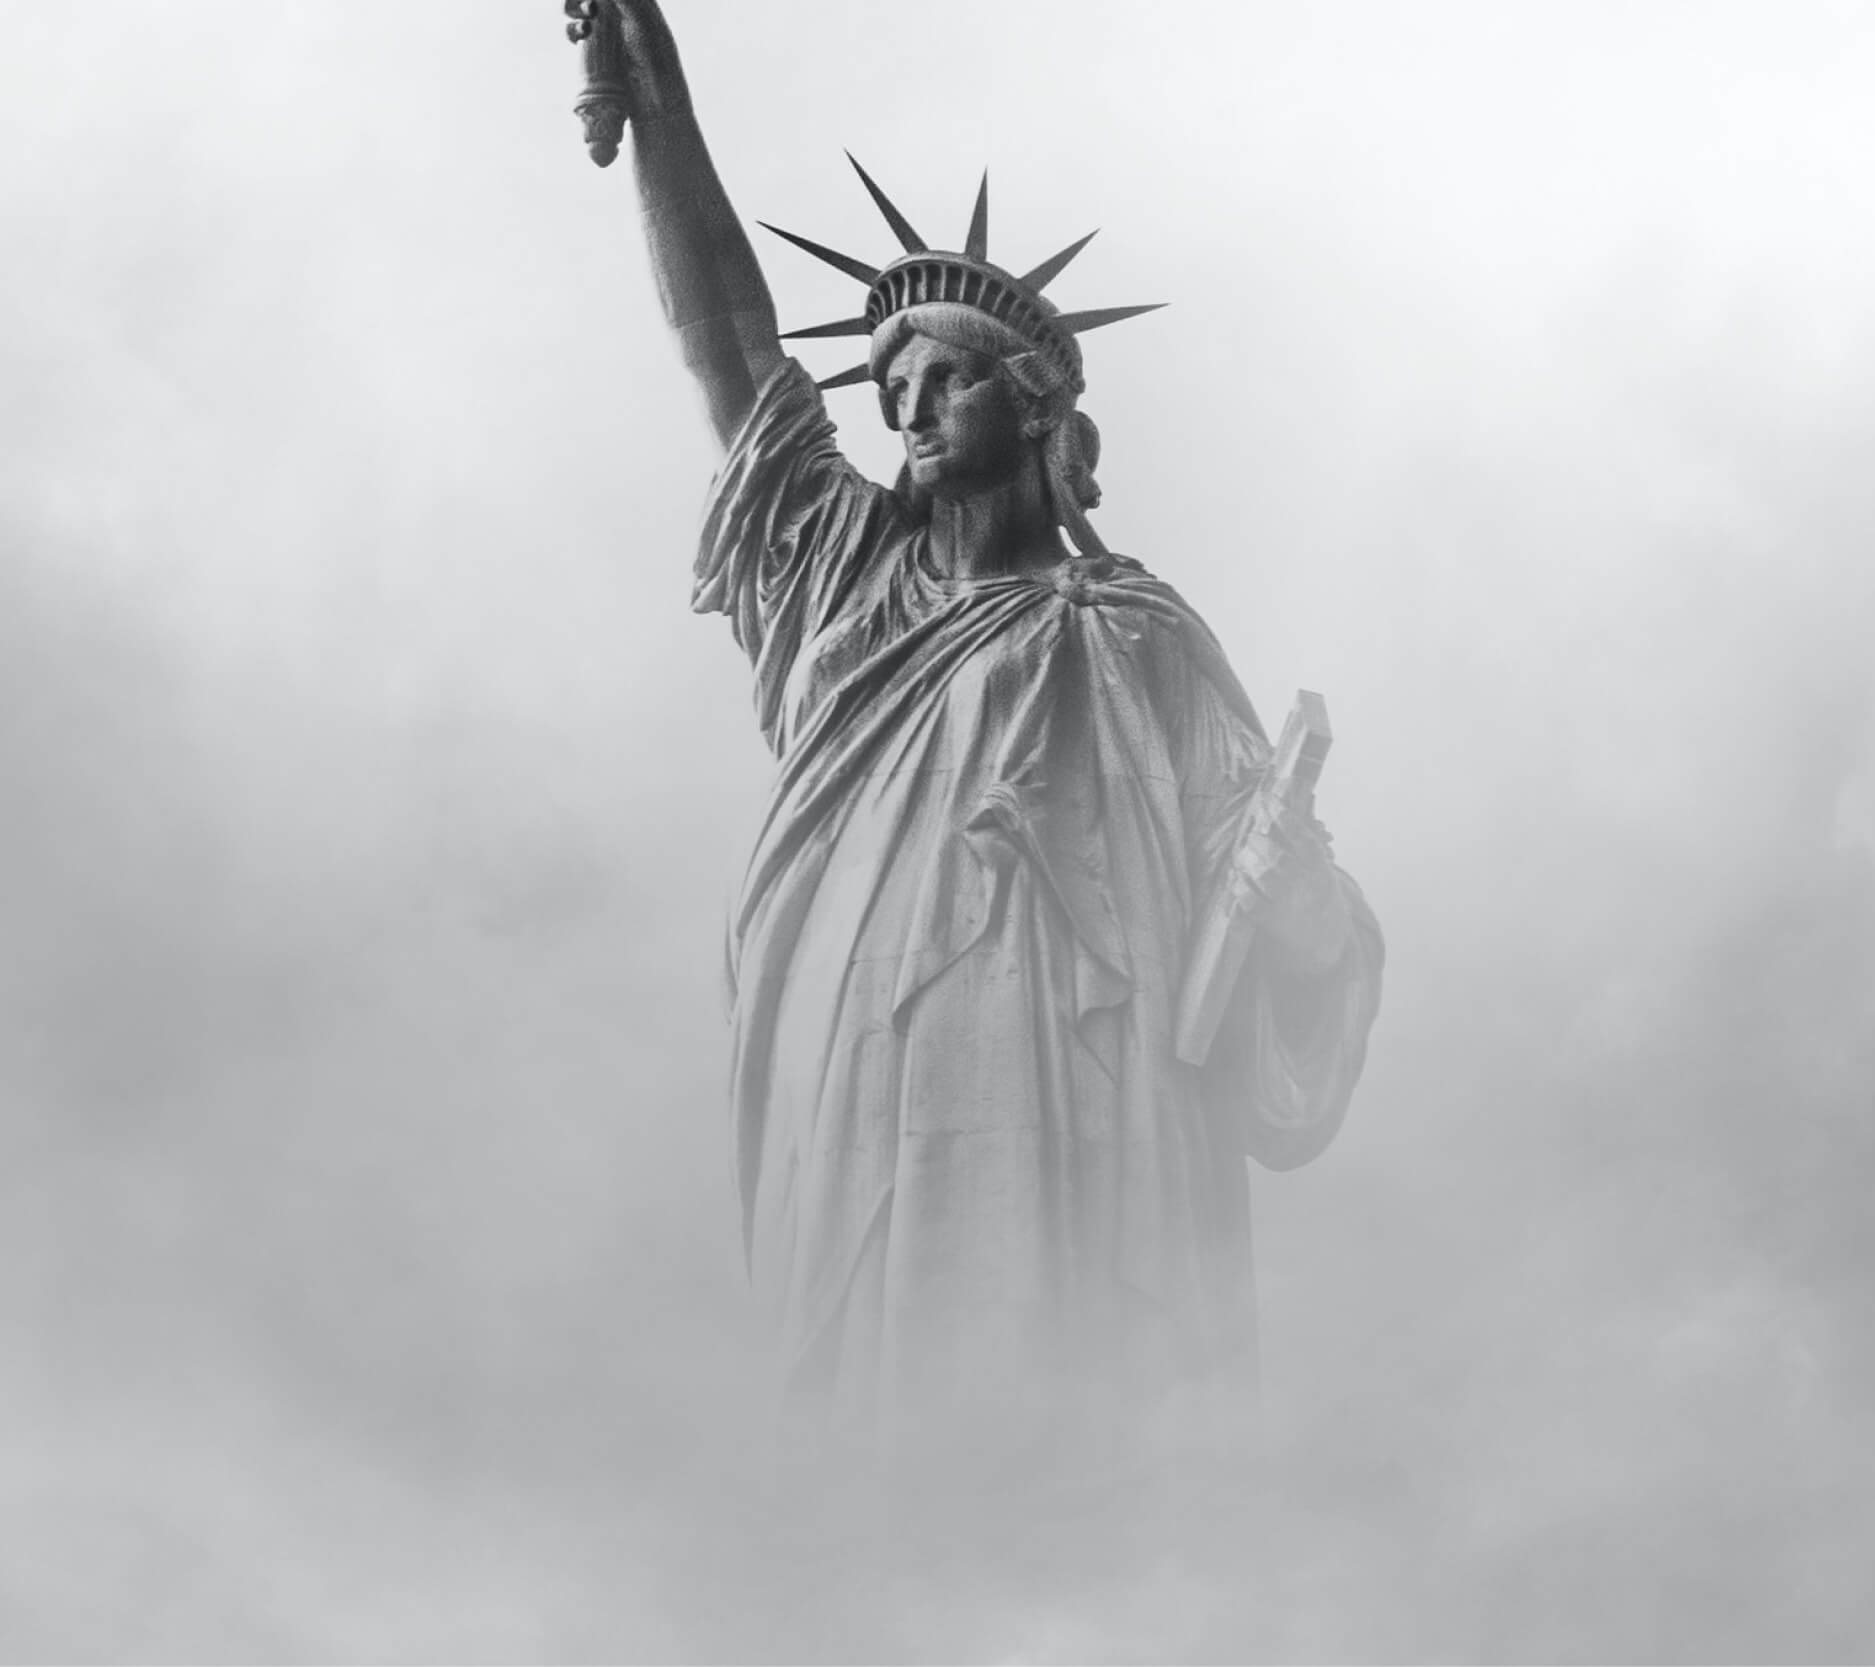 Sheaff Brock market update newsletters, May 2023, black and white image of the Statue of Liberty surrounded by fog